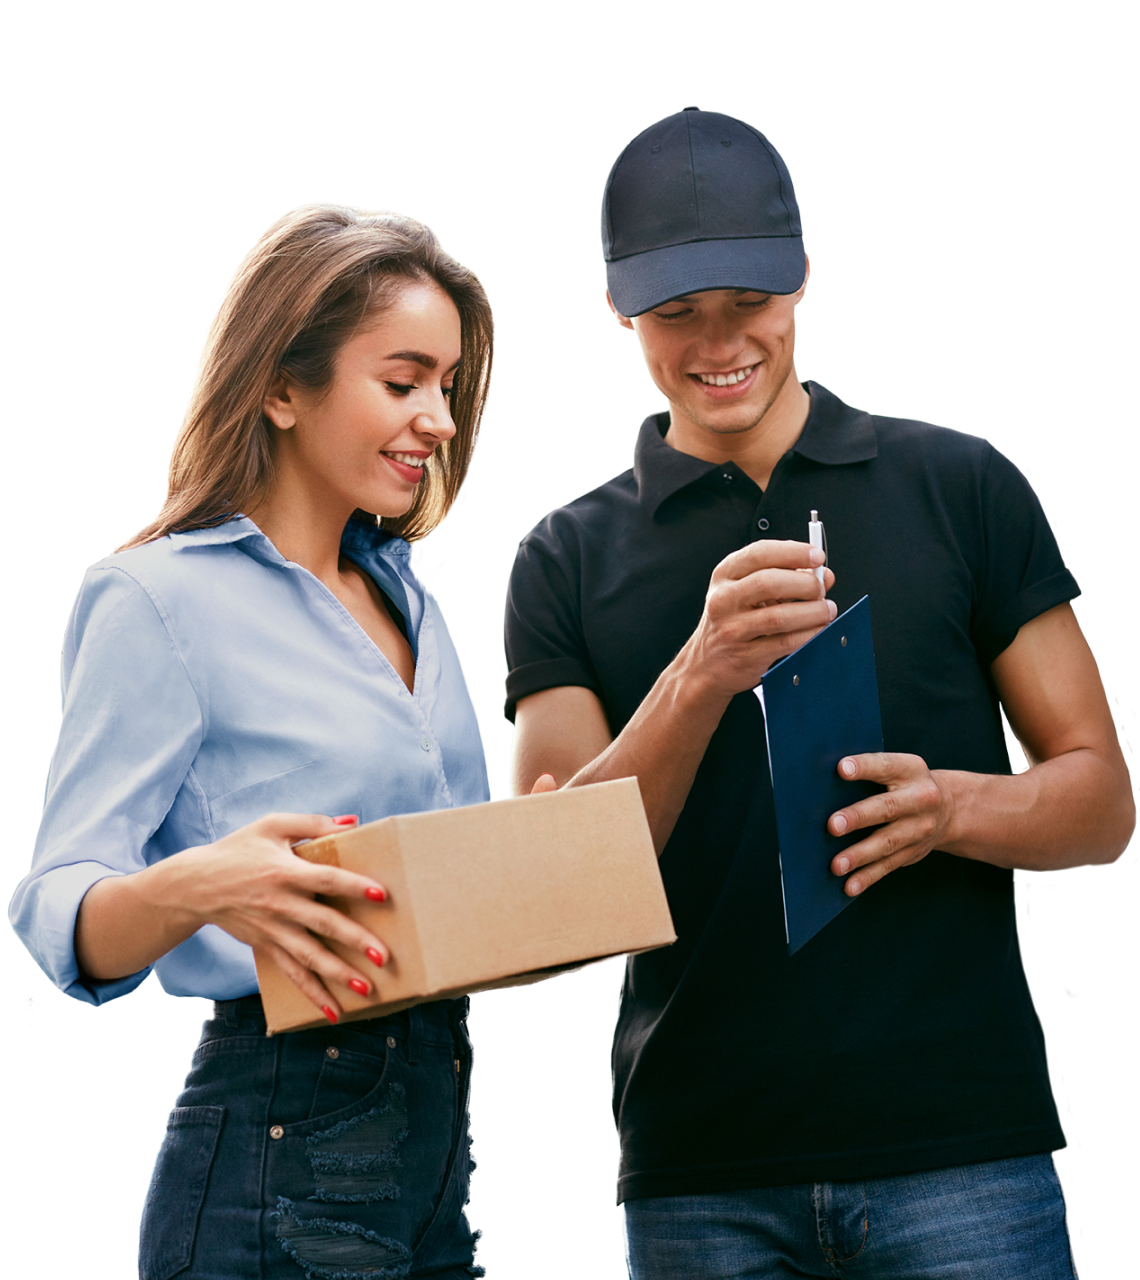 Courier service in Gurgaon - night couriers - borzo delivery